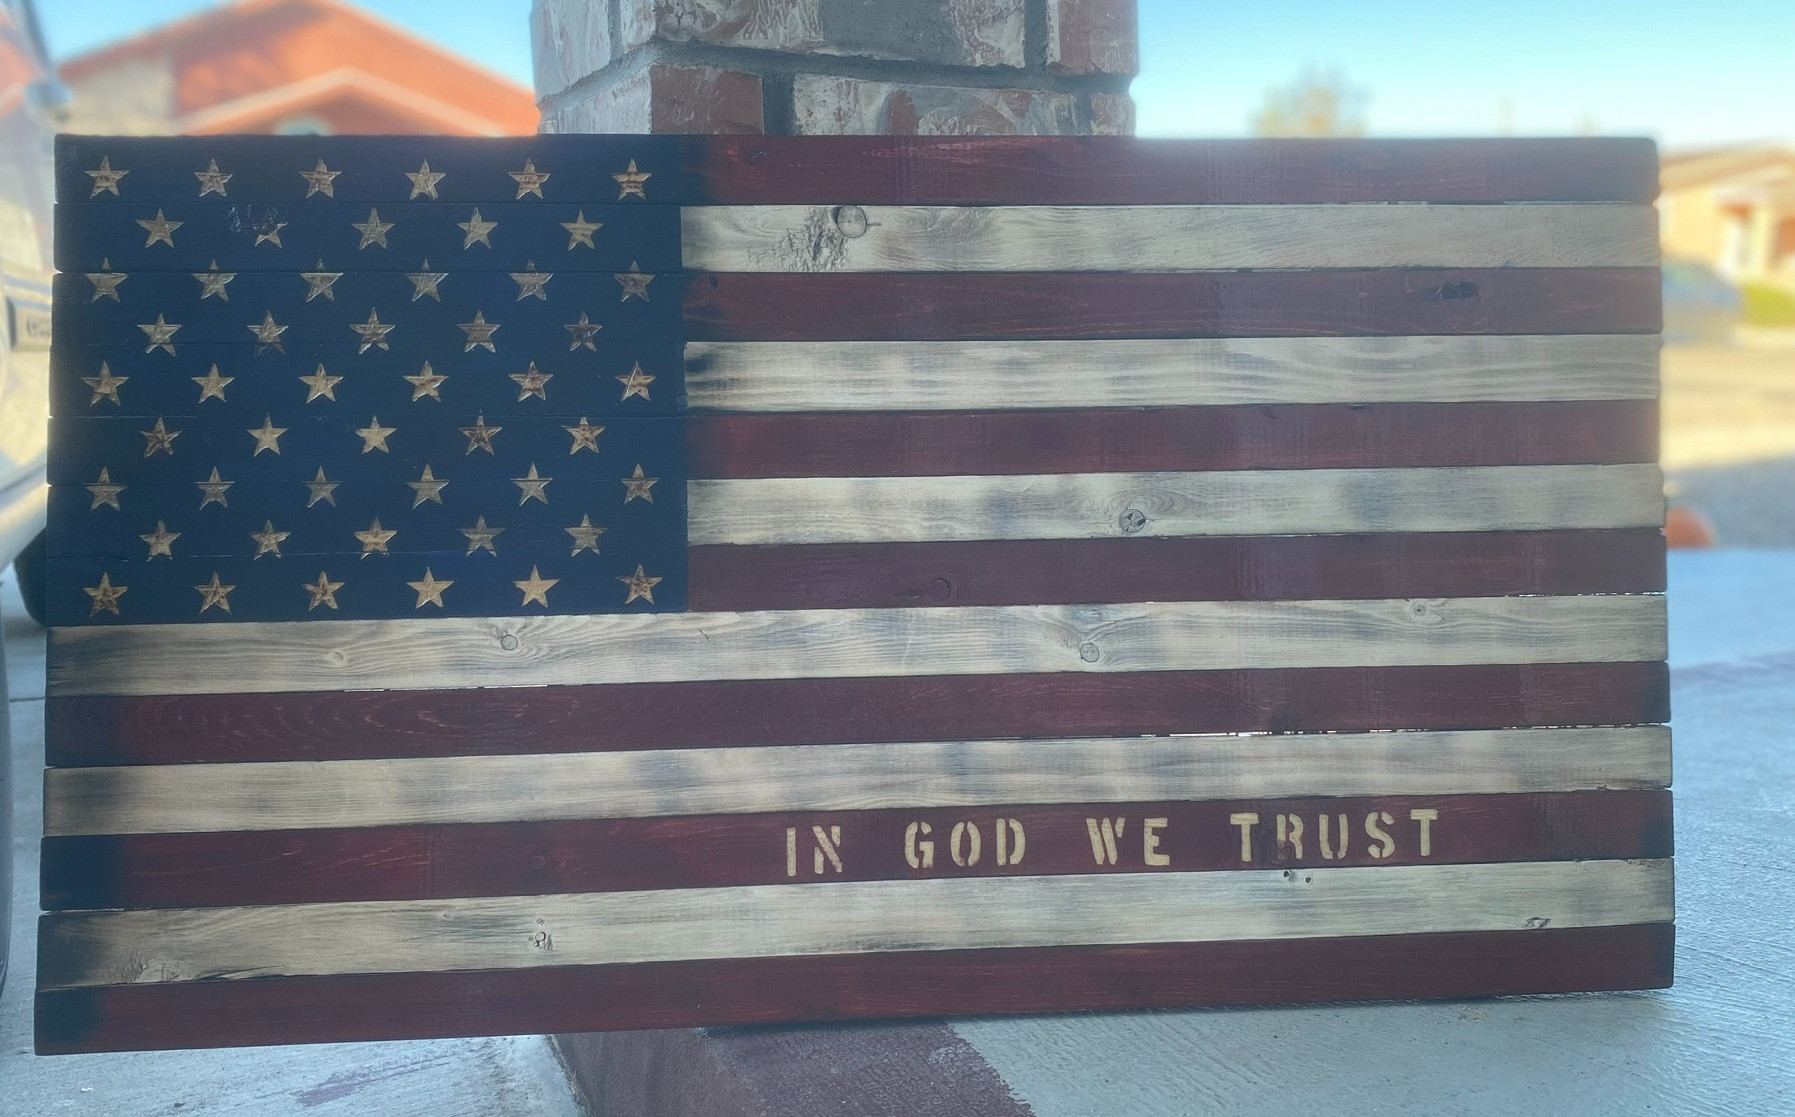 36”x19” wooden, handmade and hand carved waterproof wooden flag